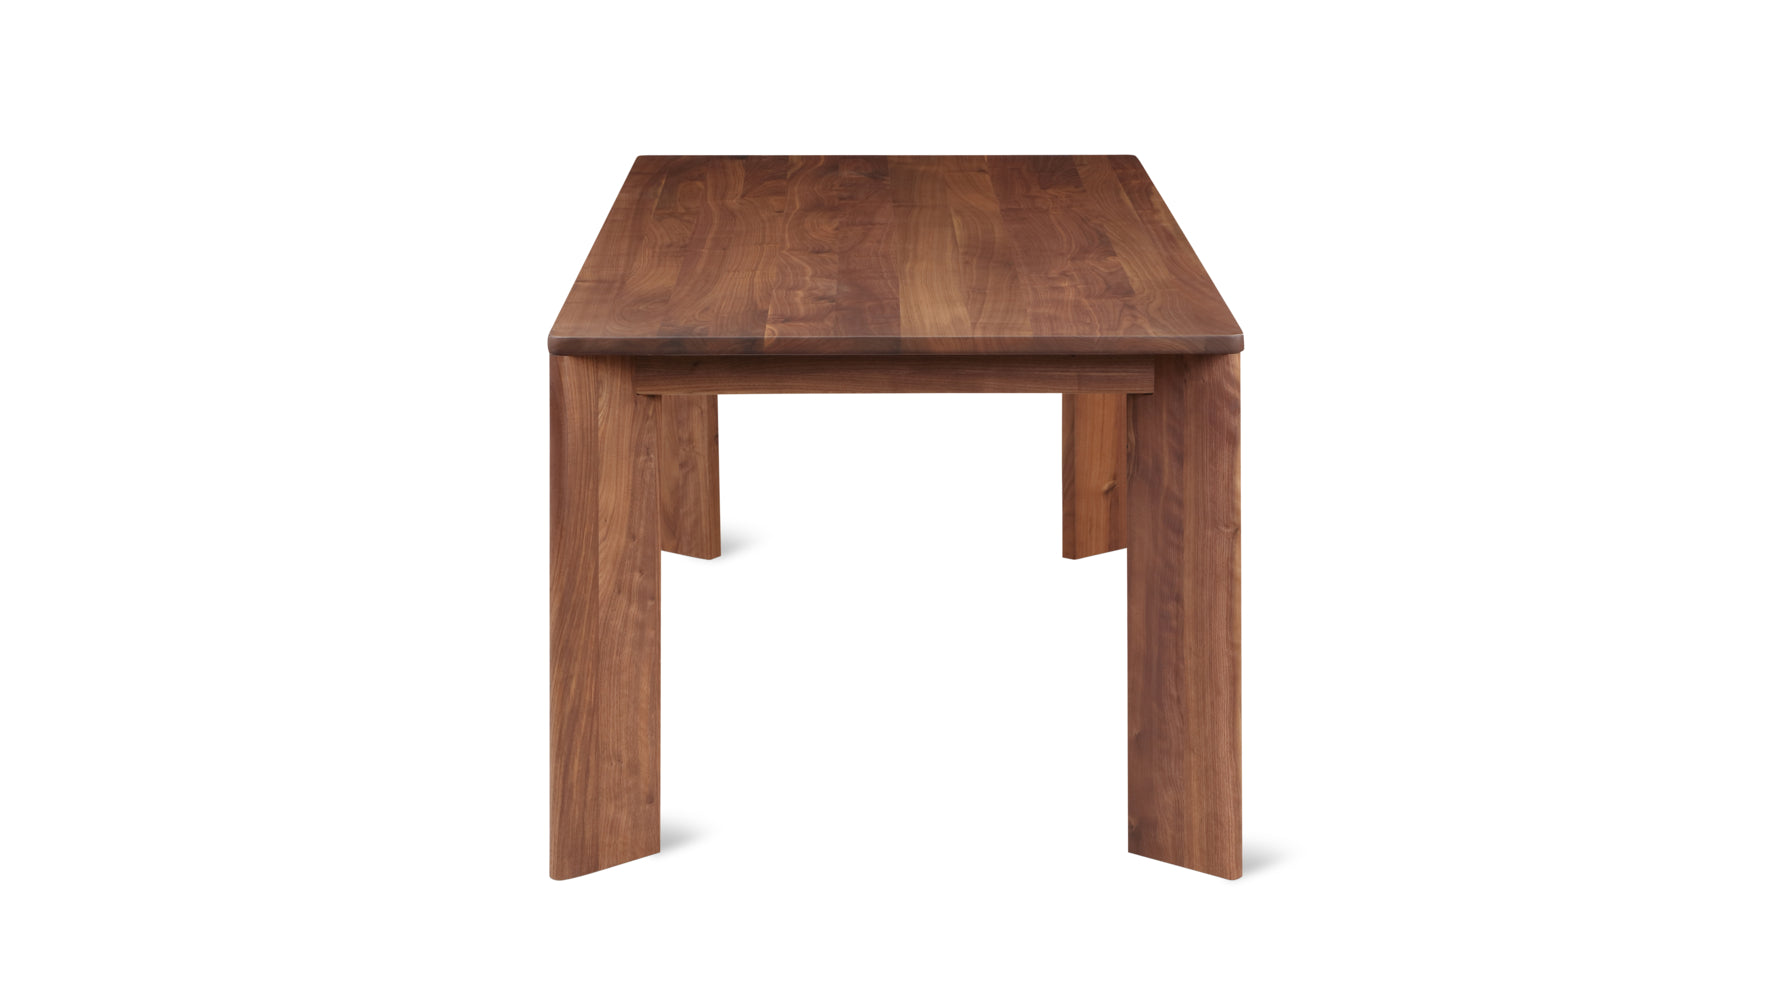 Frame Dining Table, Seats 4-6 People, Walnut - Image 3